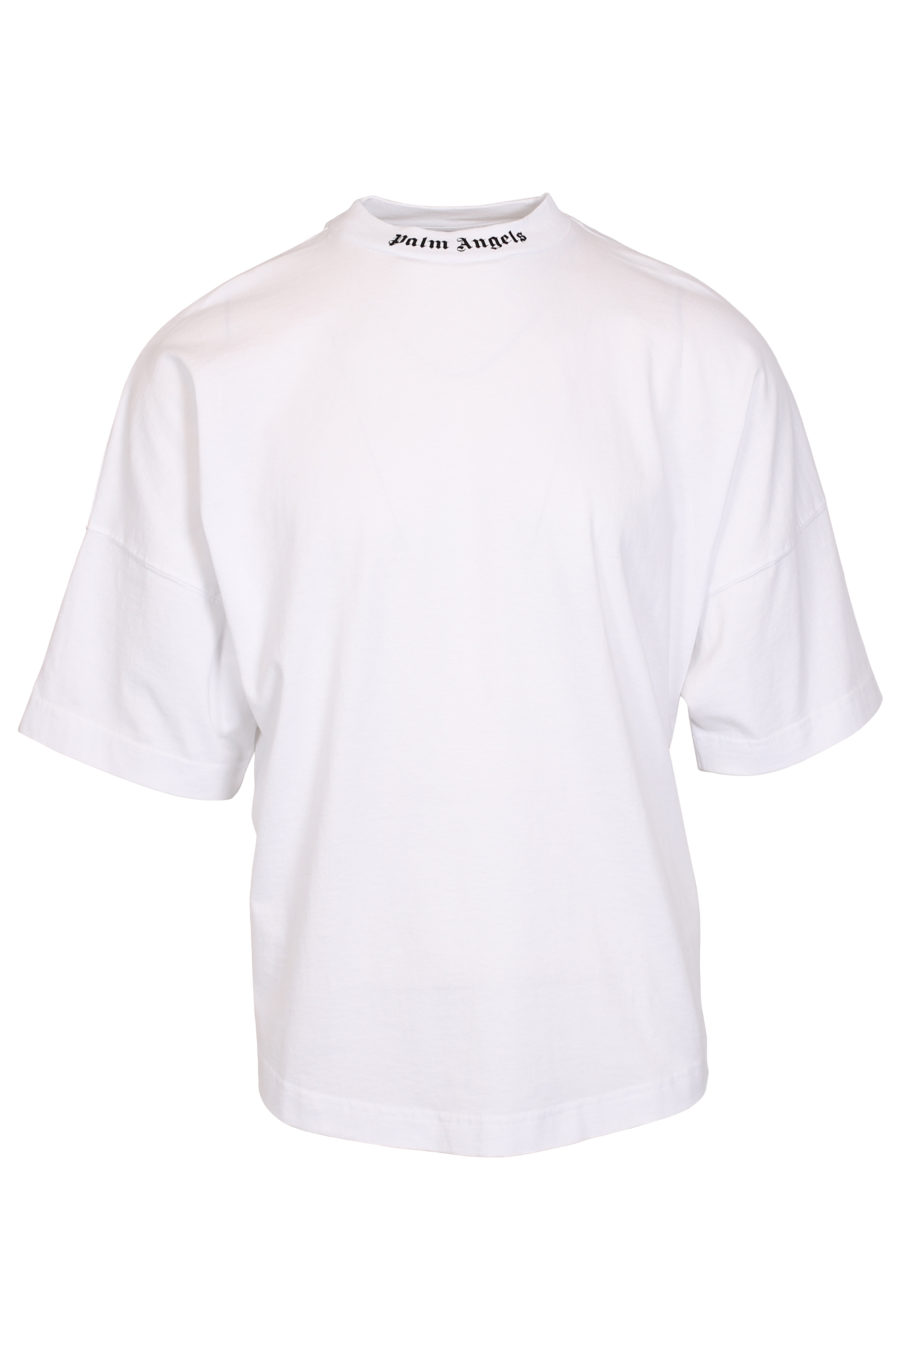 White oversize T-shirt with logo on the collar - IMG 1032